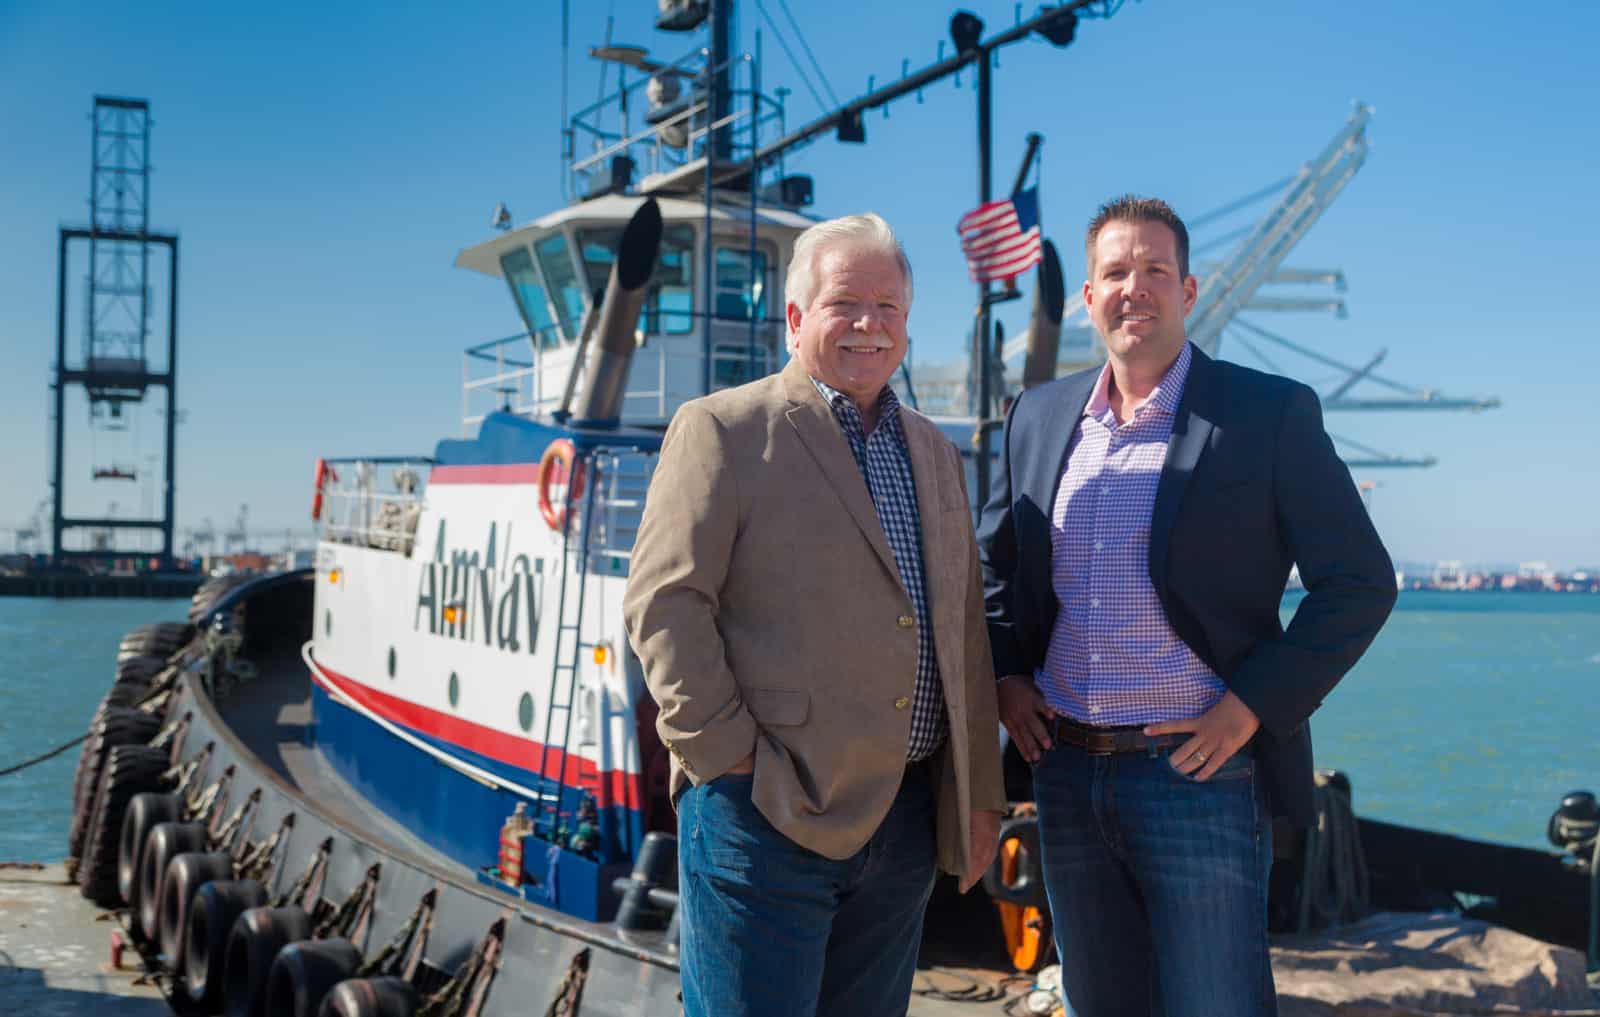 Milt and Dave Merrit stand in front of an AmNav tractor tugboat, both wearing casual suits.